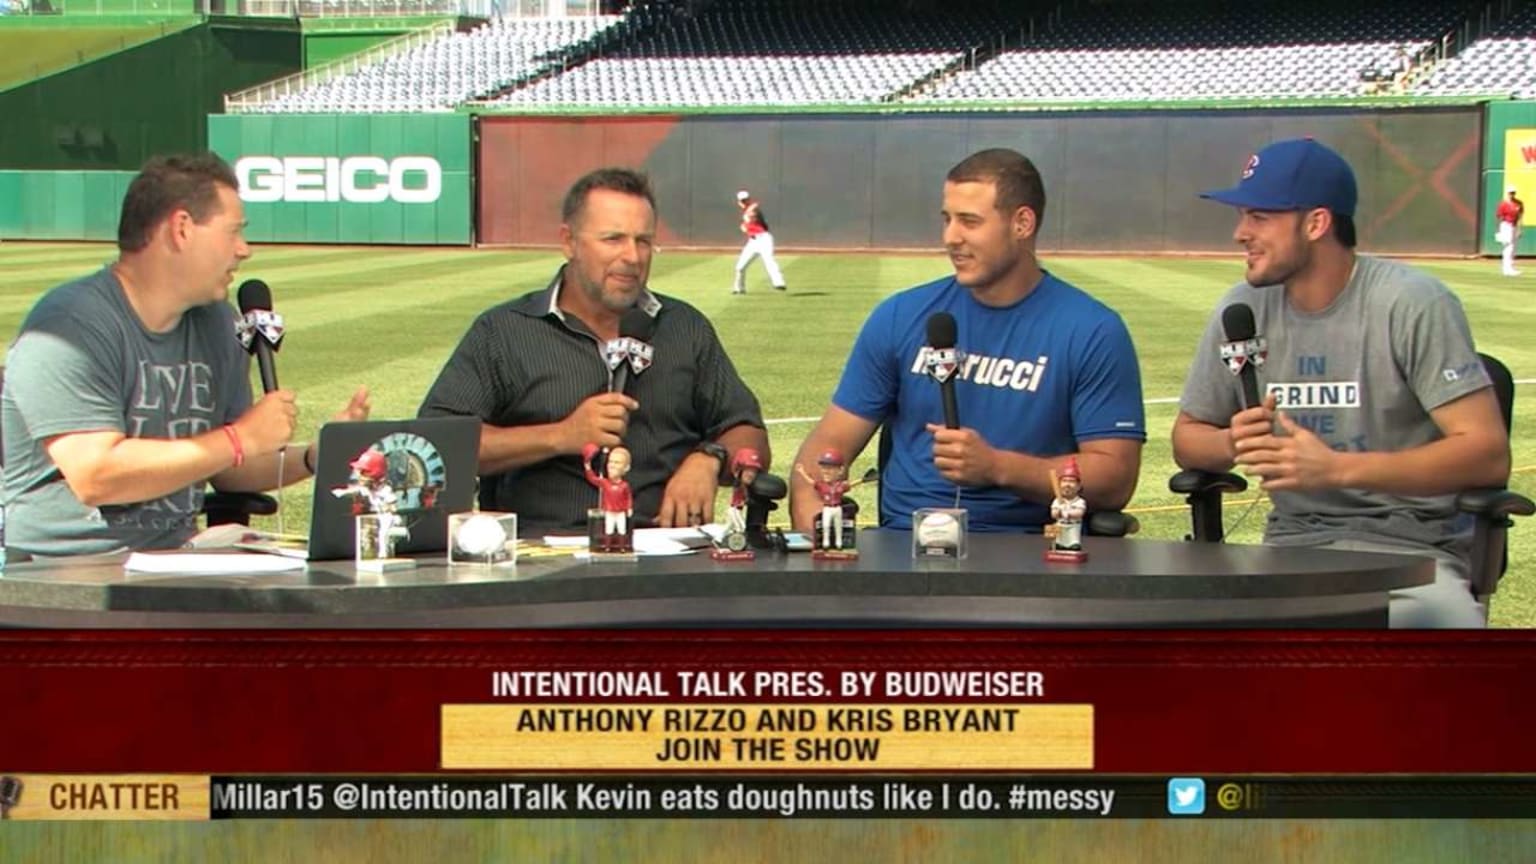 Talkin' Baseball on X: Anthony Rizzo and Kris Bryant will face